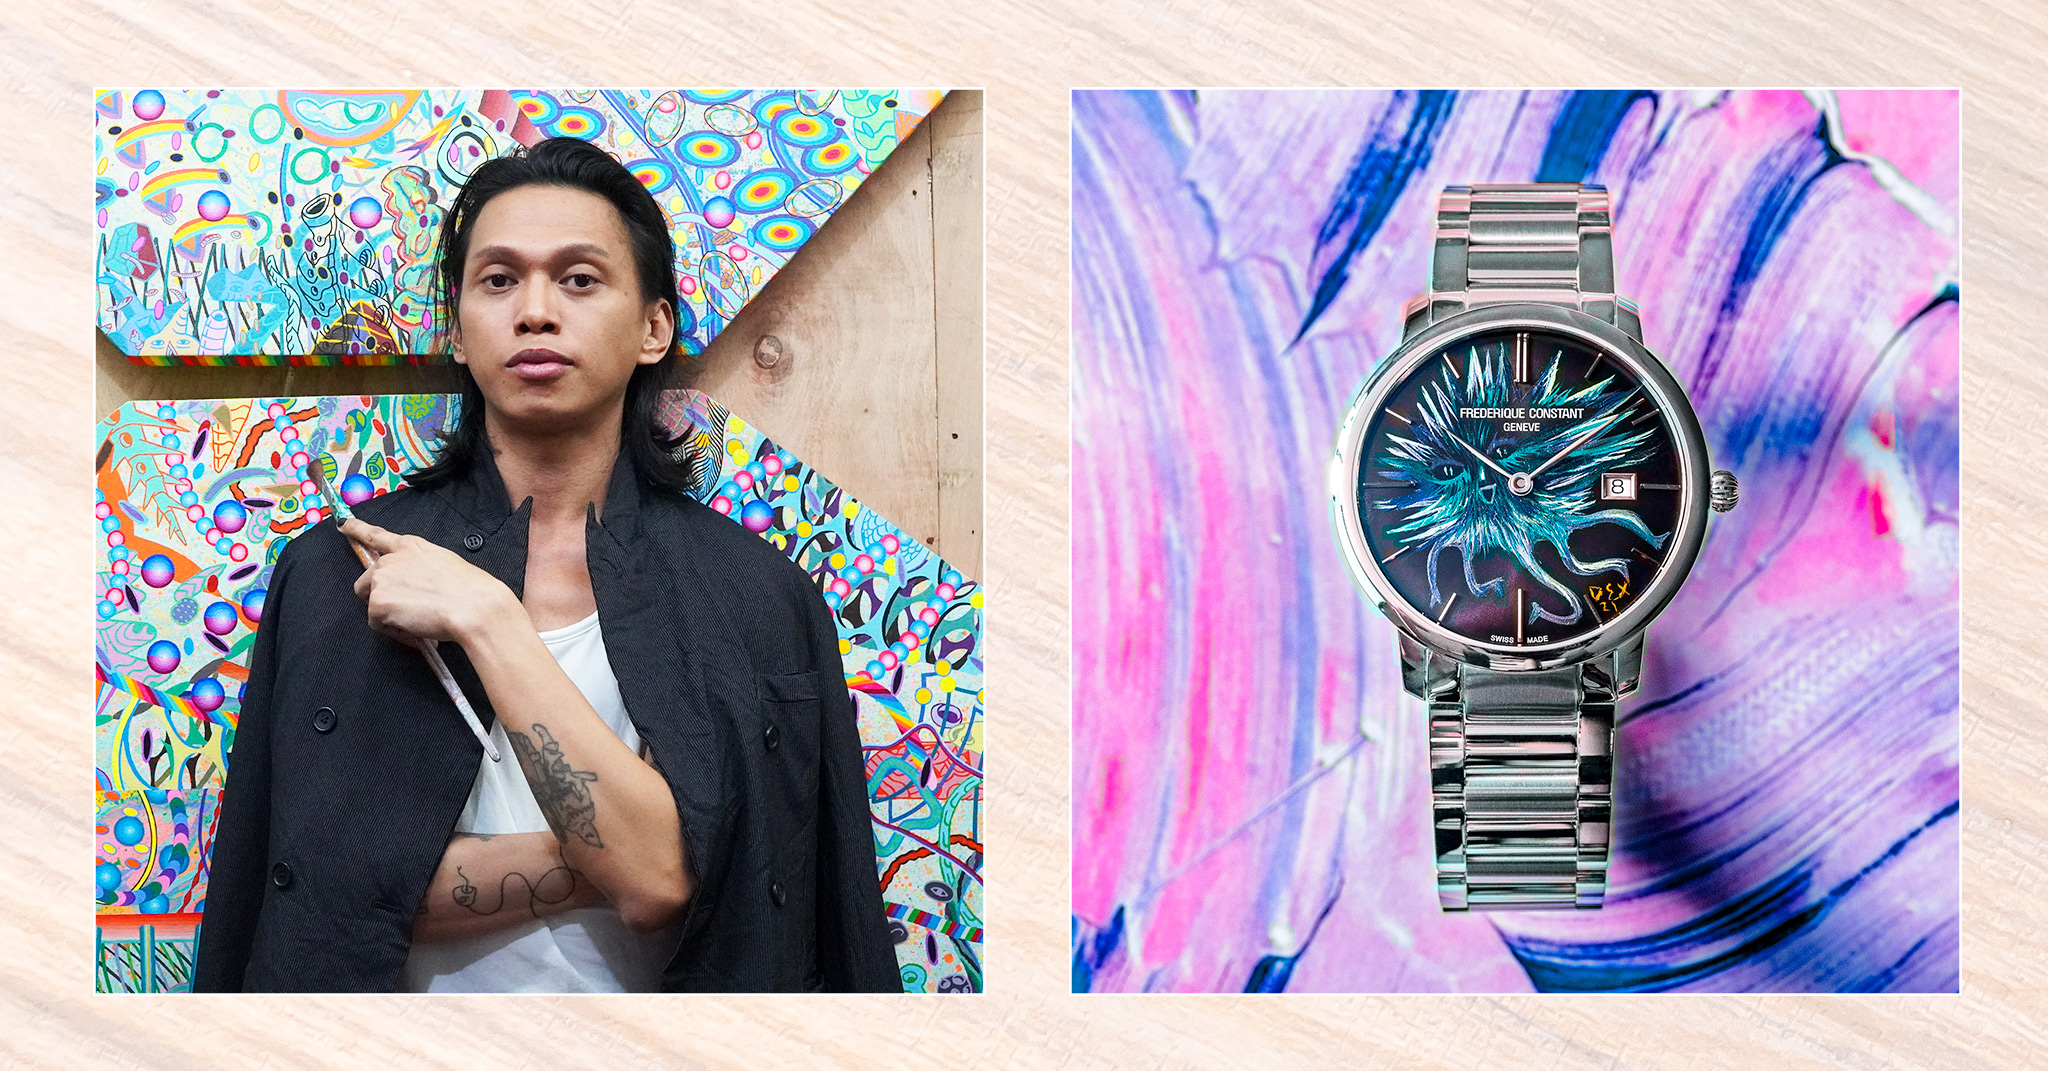 Frederique Constant teams up with Filipino artist Dex Fernandez for its Passion Collection